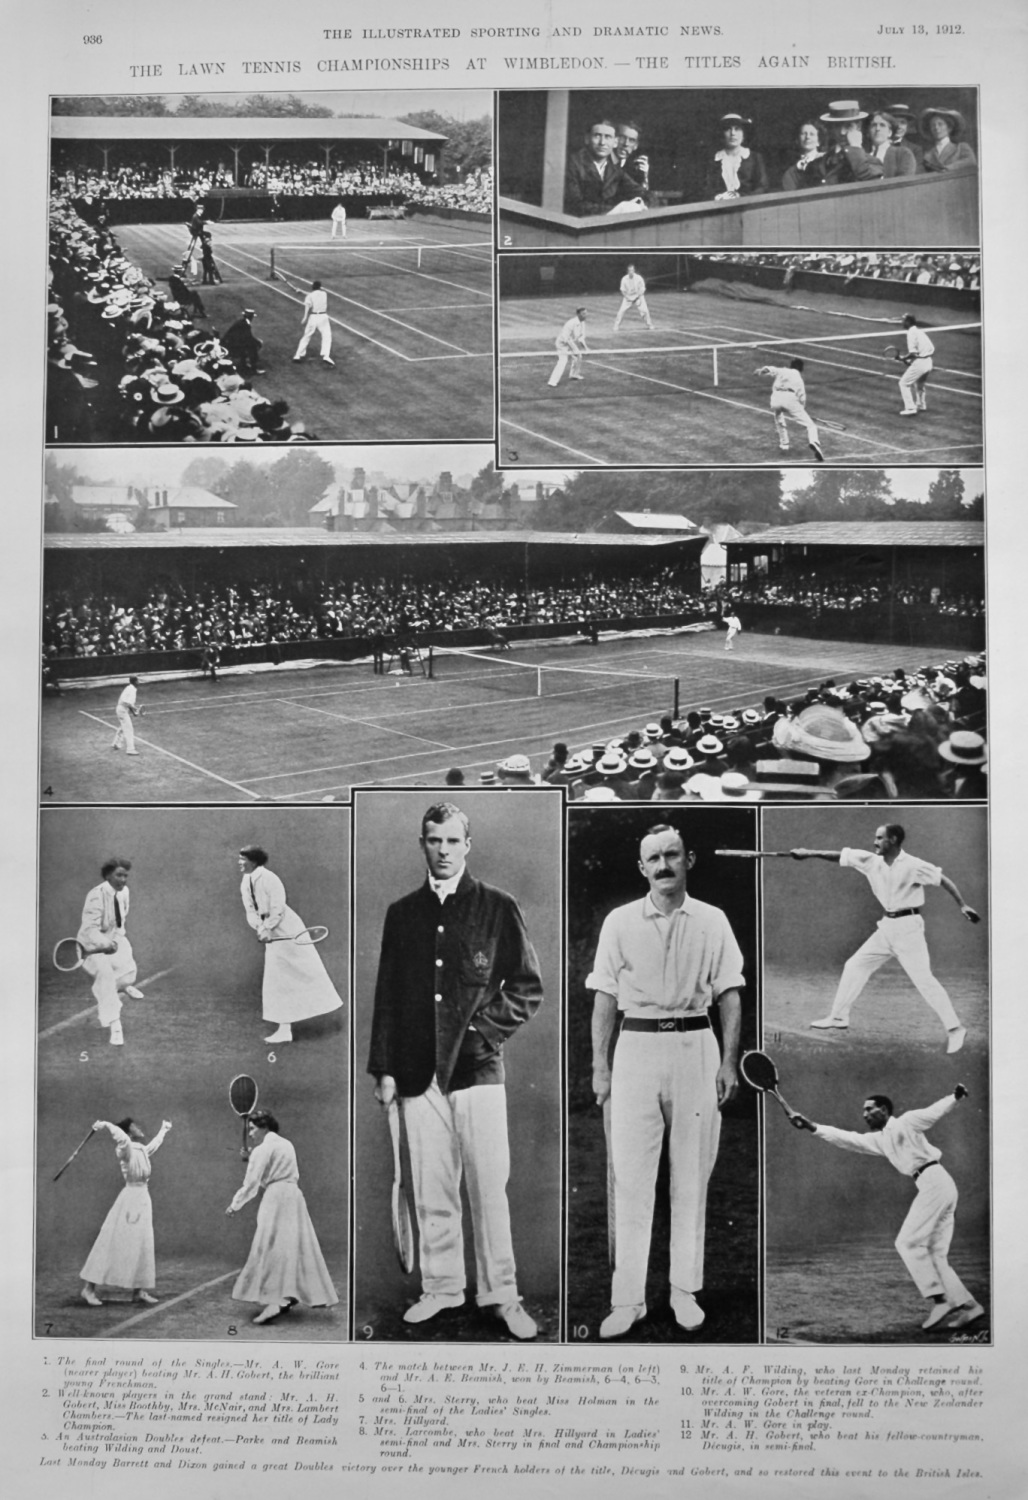 The Lawn Tennis Championships at Wimbledon.- The Titles again British.  191